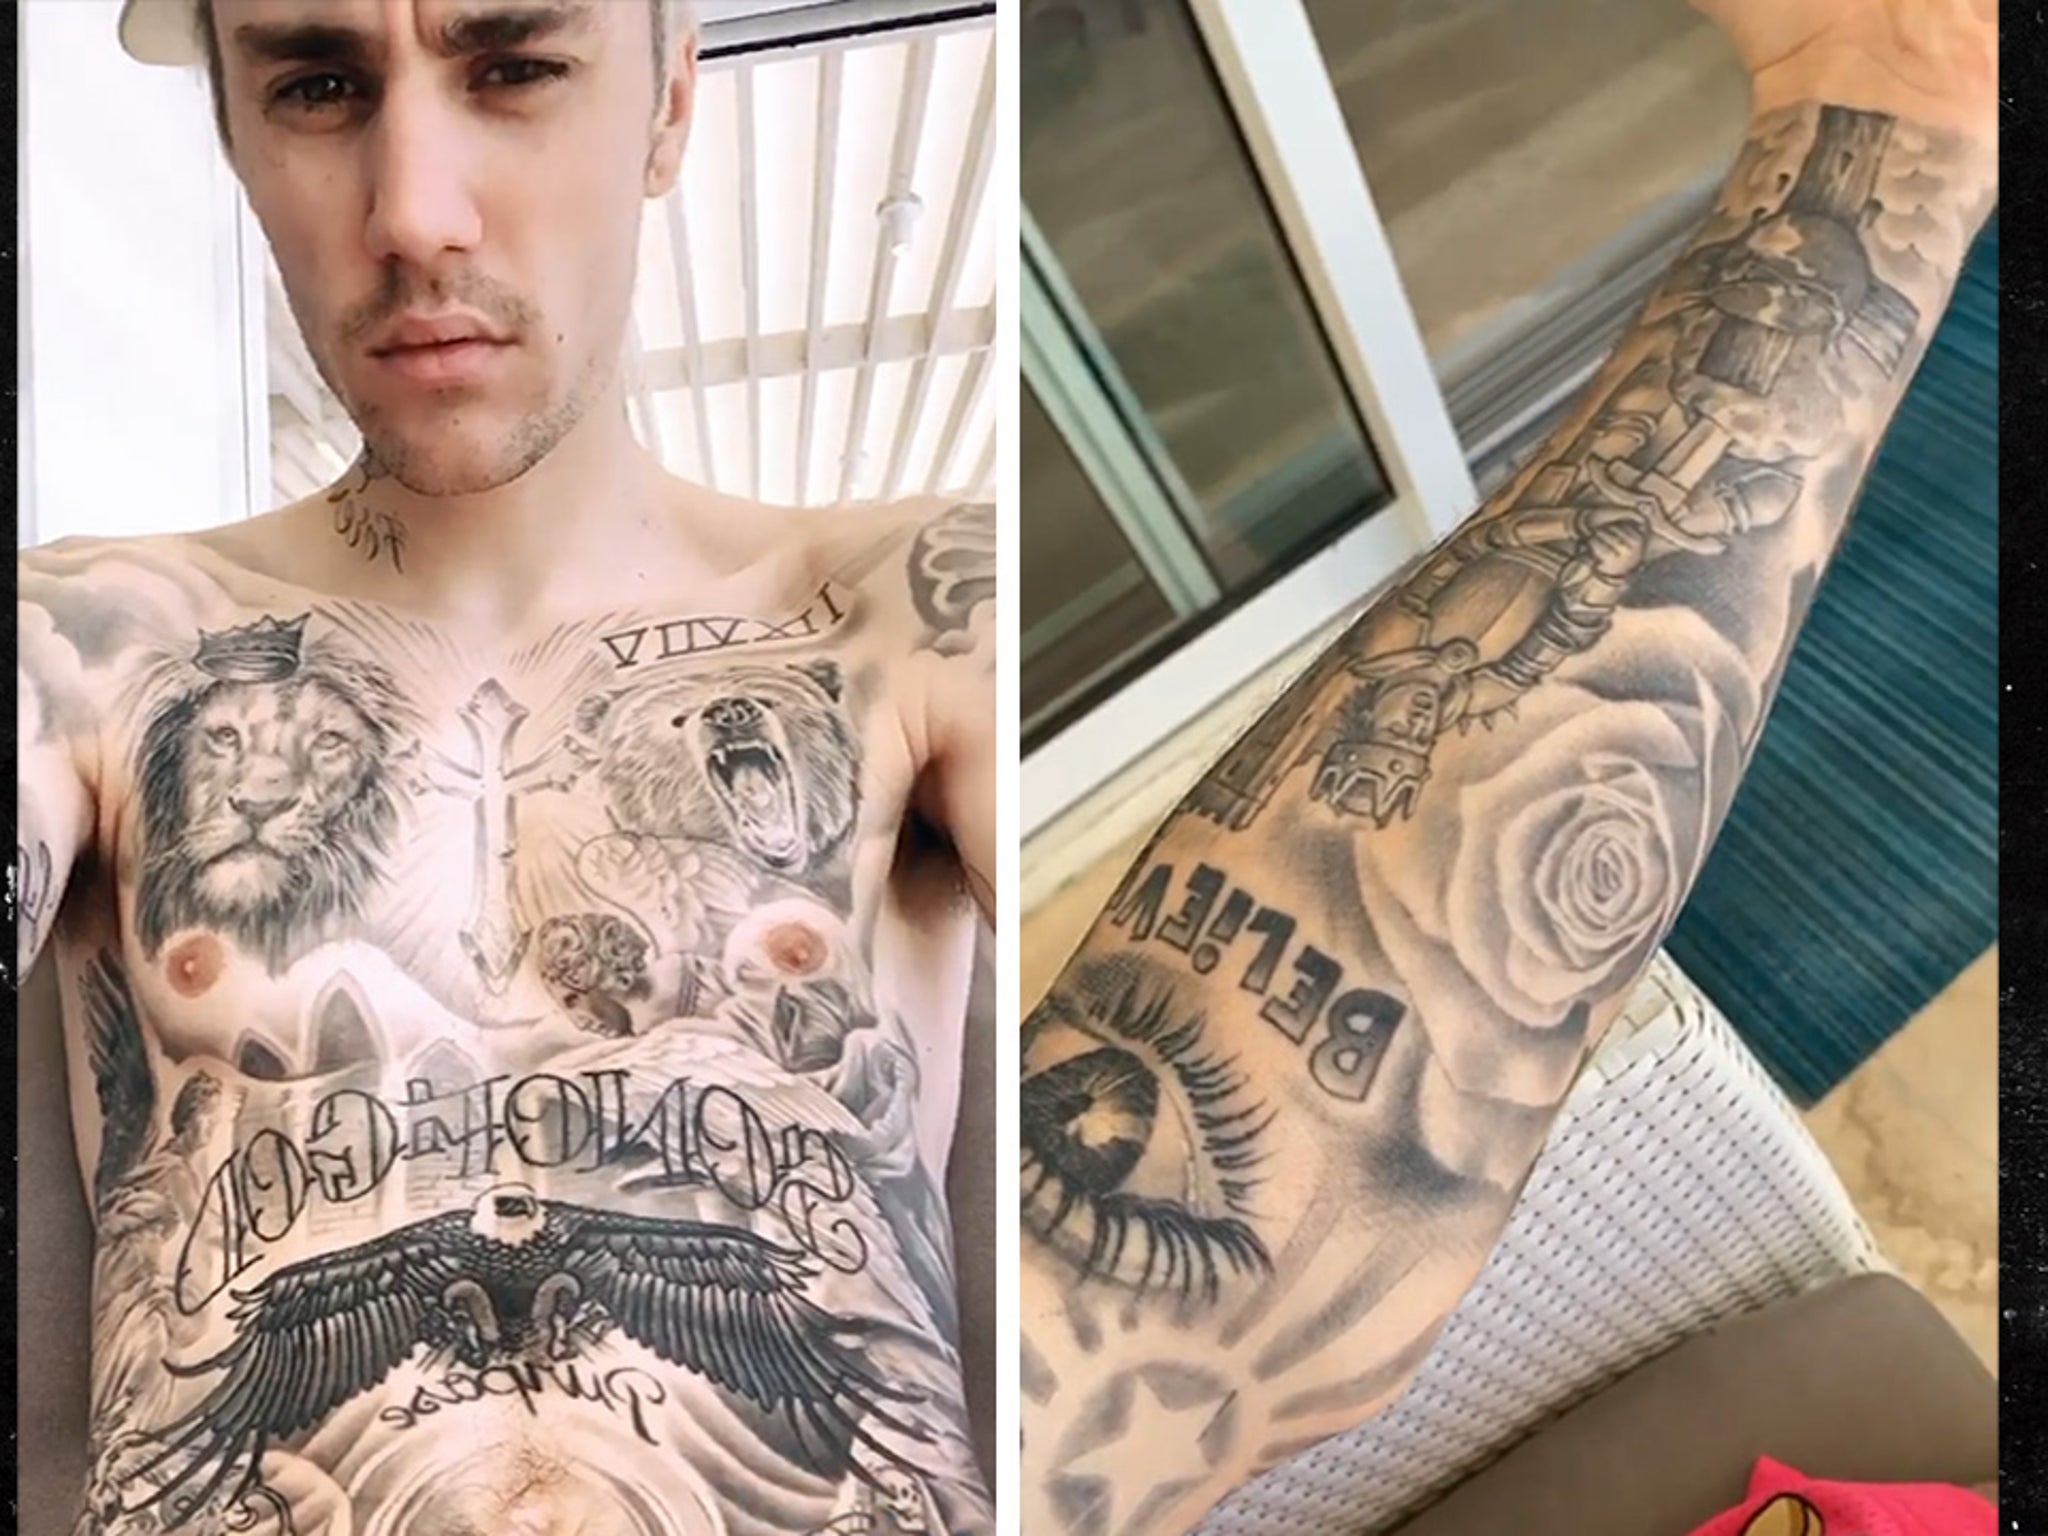 Justin Bieber Gives Full Body Tour of All His Tattoos